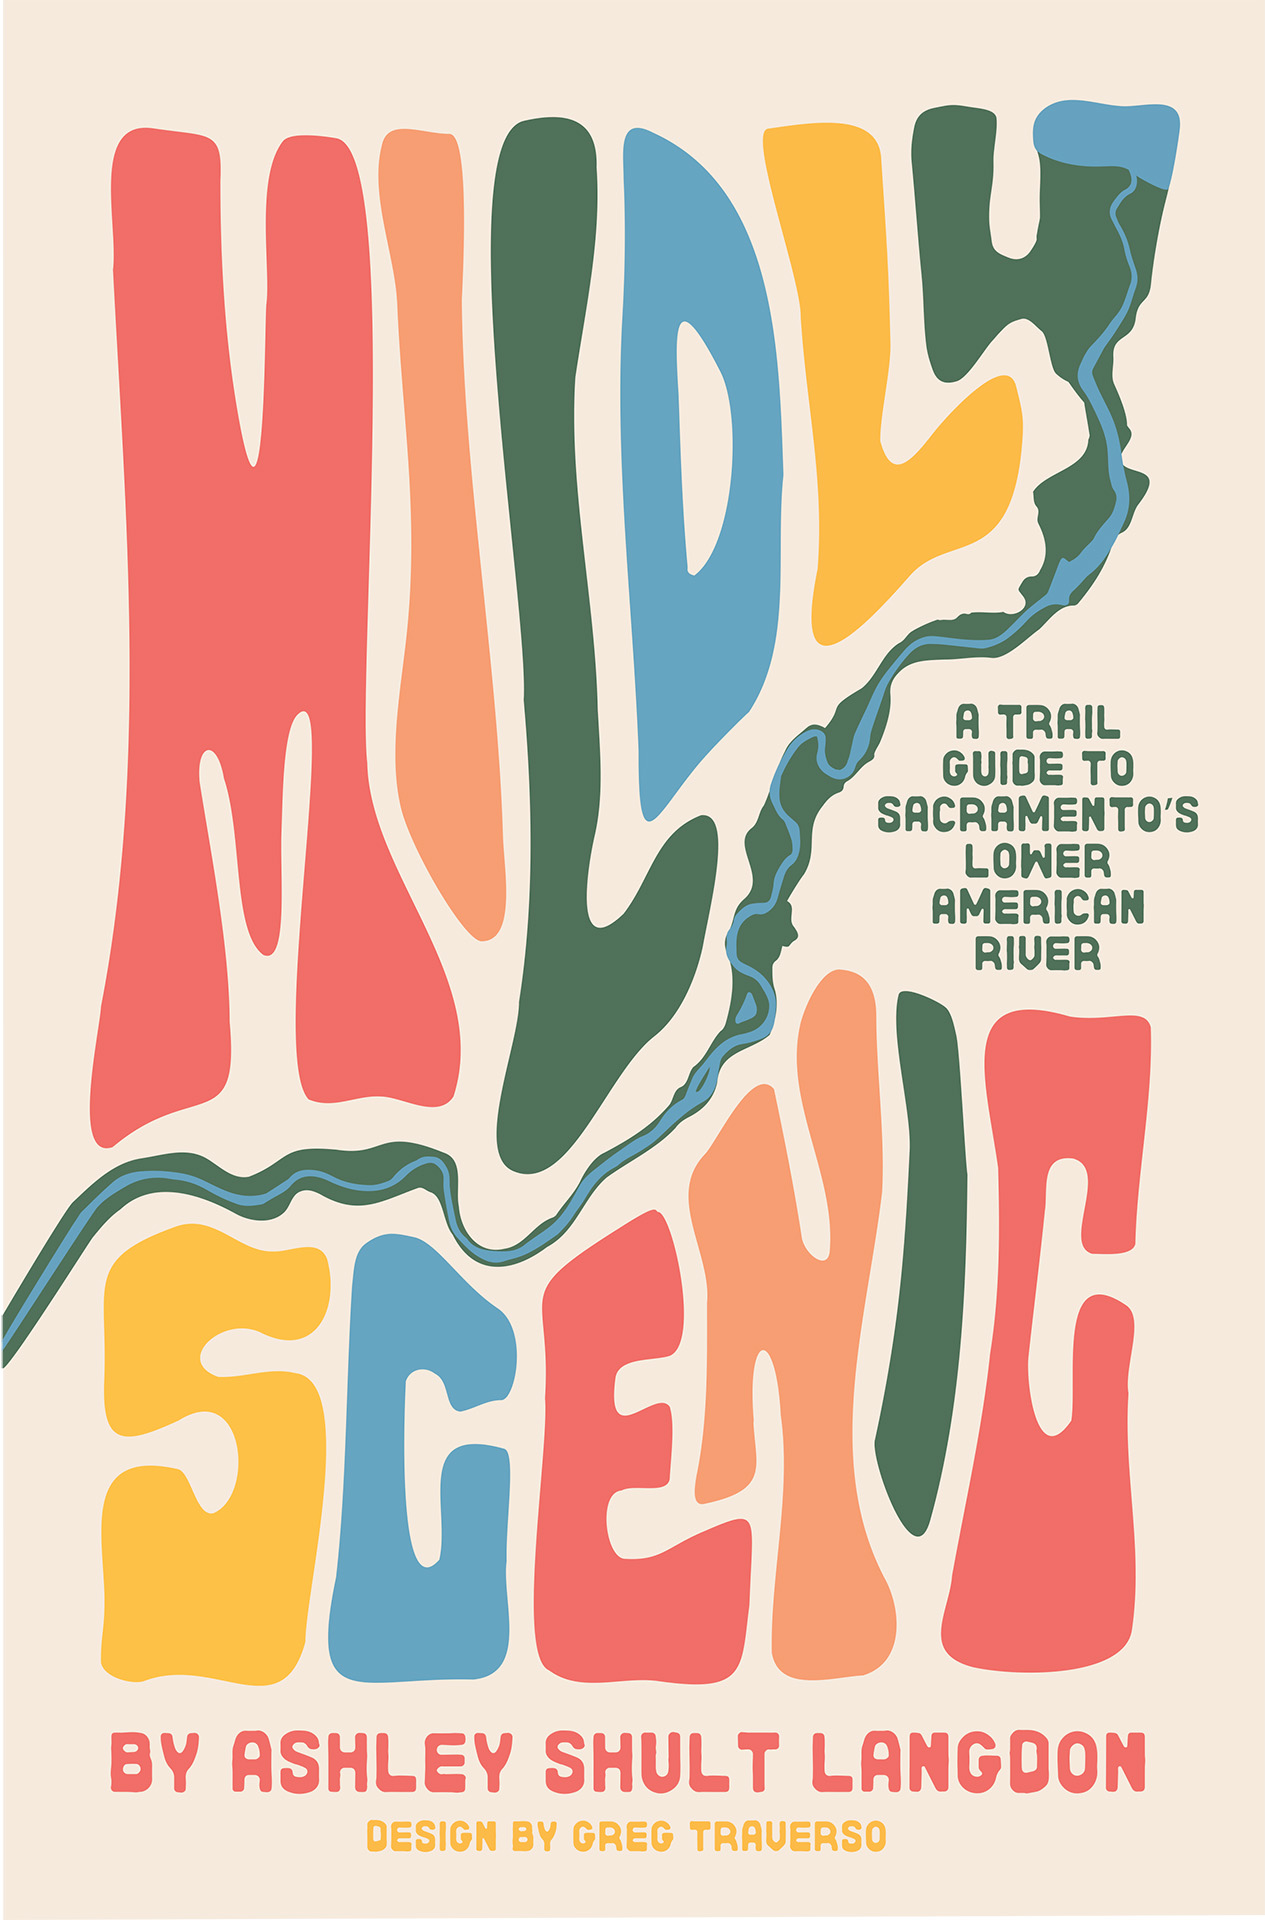 Cover of "Mildly Scenic" book.